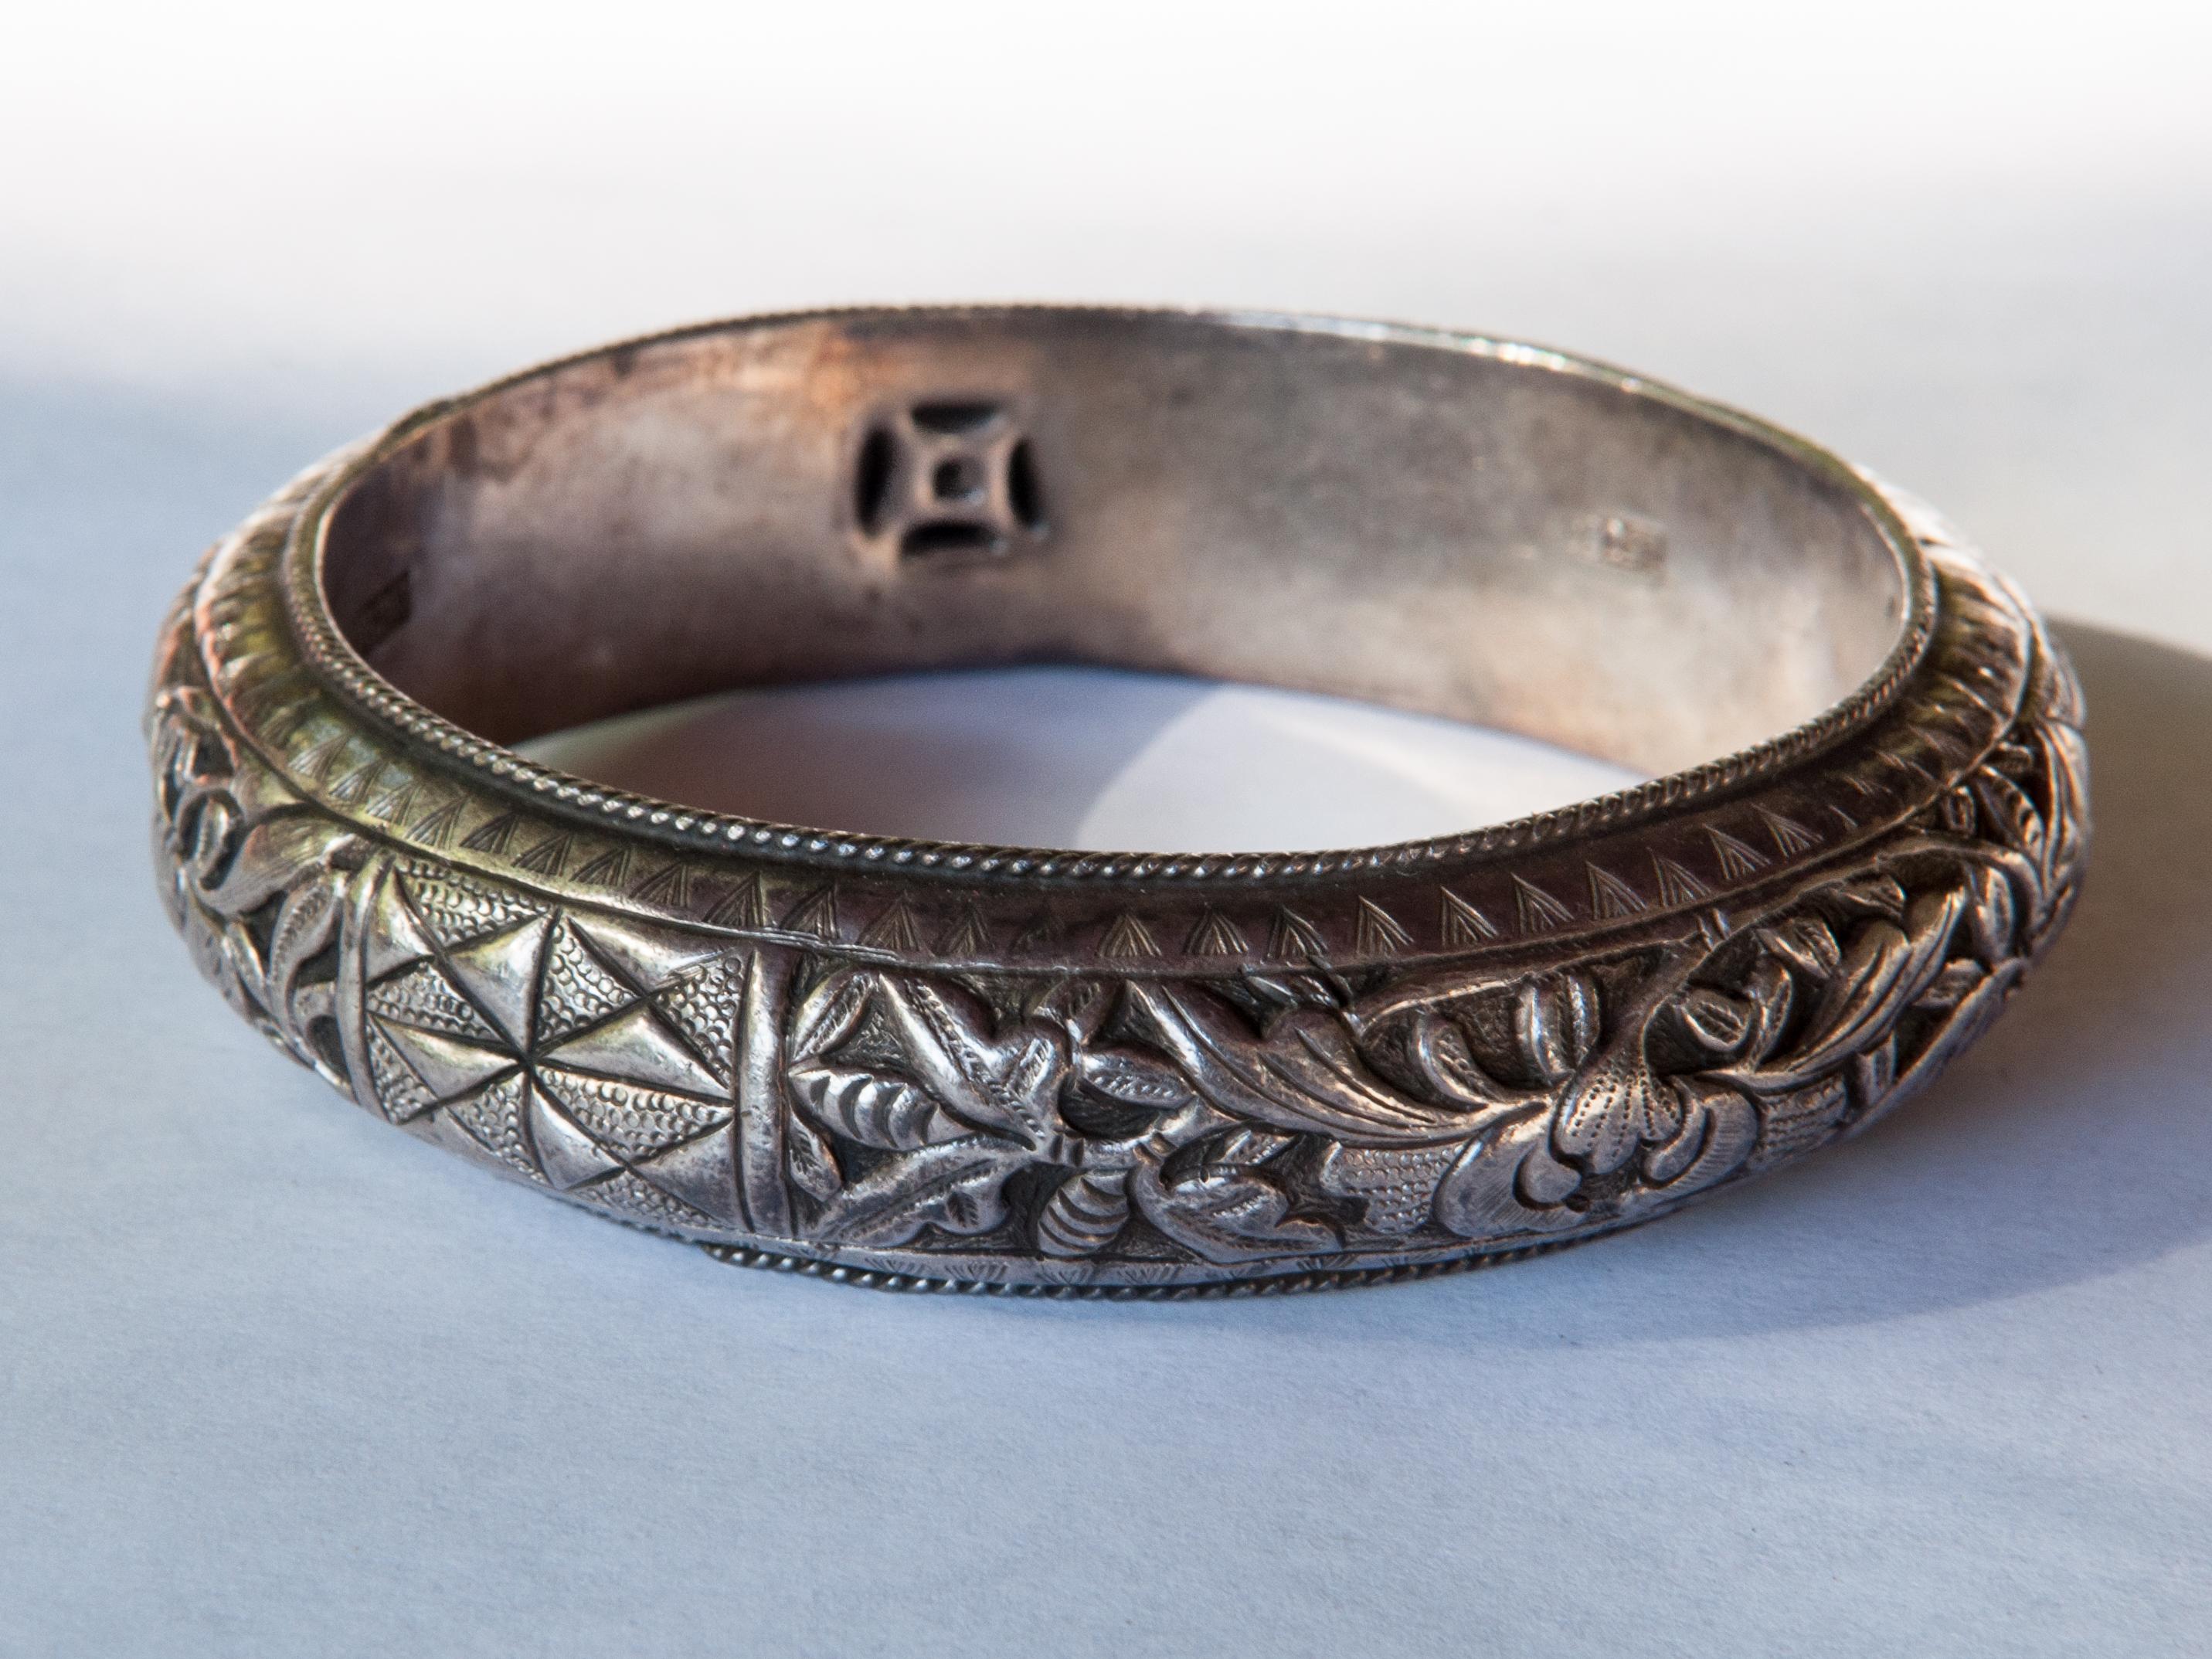 Vintage tribal silver bracelet with floral design from the Hmong of Southwest China, mid-20th century. This hand worked hollow silver bracelet comes from the Hmong ethnic minority of southwest China. It was most likely one of a pair, often presented